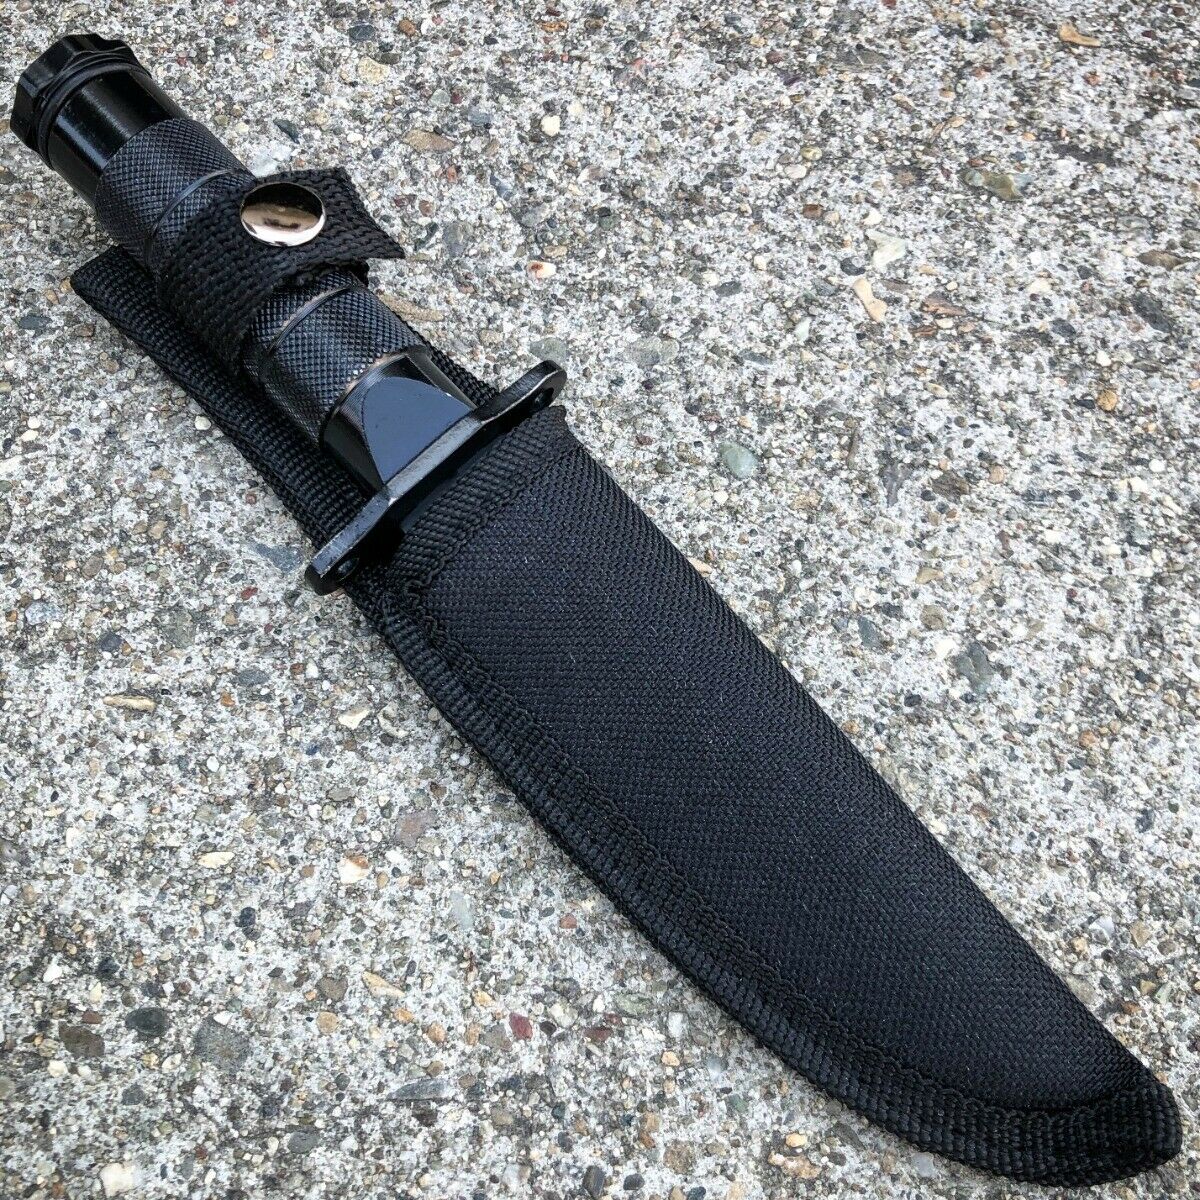 8.5 Tactical Fishing Hunting Survival Knife w/ Sheath Bowie Survival